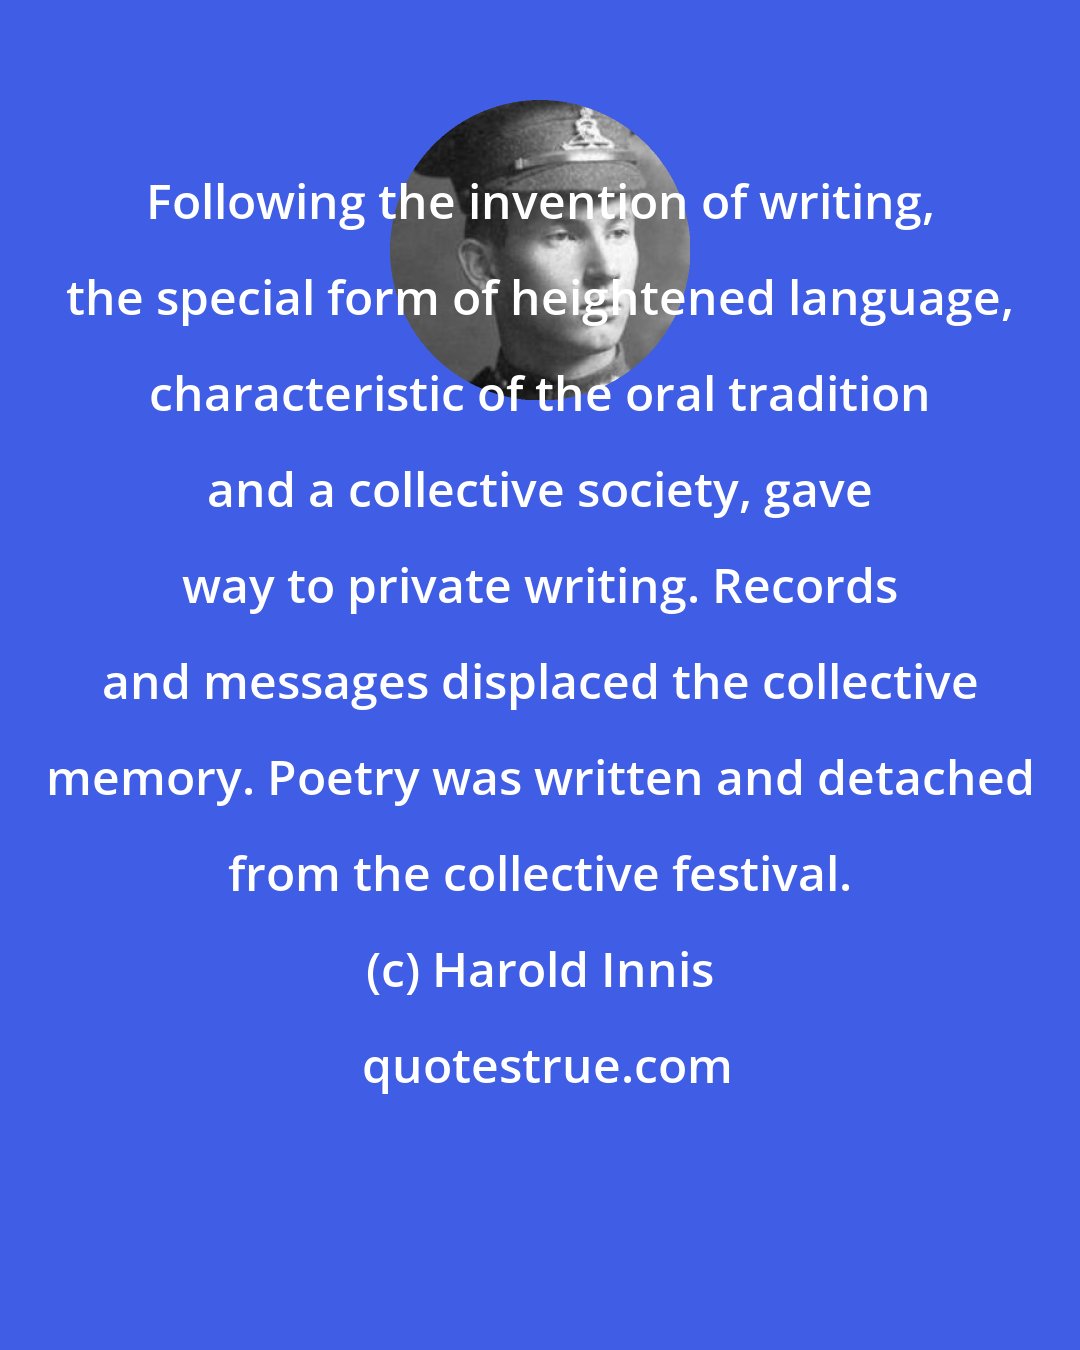 Harold Innis: Following the invention of writing, the special form of heightened language, characteristic of the oral tradition and a collective society, gave way to private writing. Records and messages displaced the collective memory. Poetry was written and detached from the collective festival.